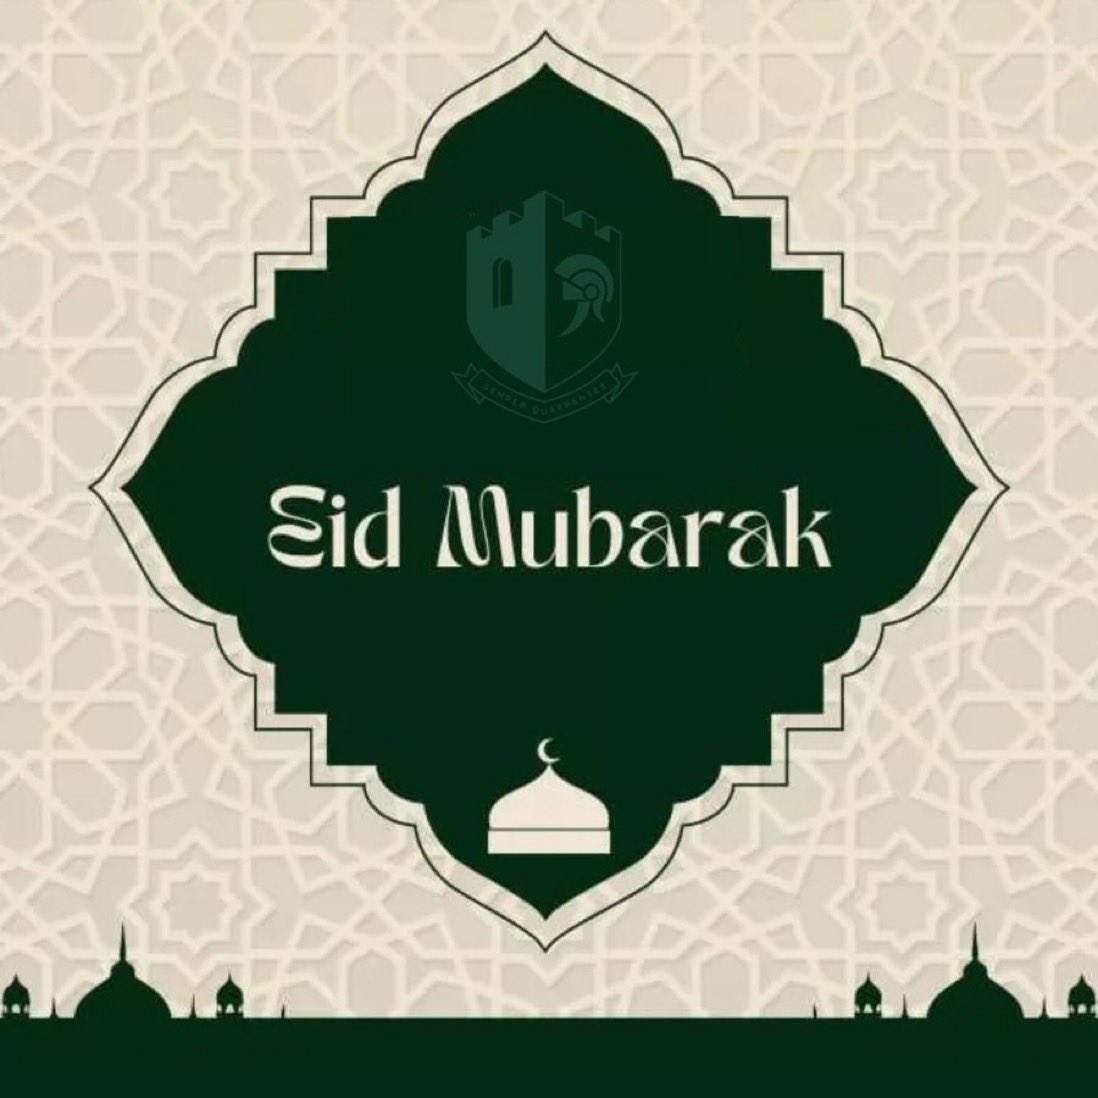 Wishing all our students, staff and community who are celebrating, a blessed Eid filled with love, peace and happiness.